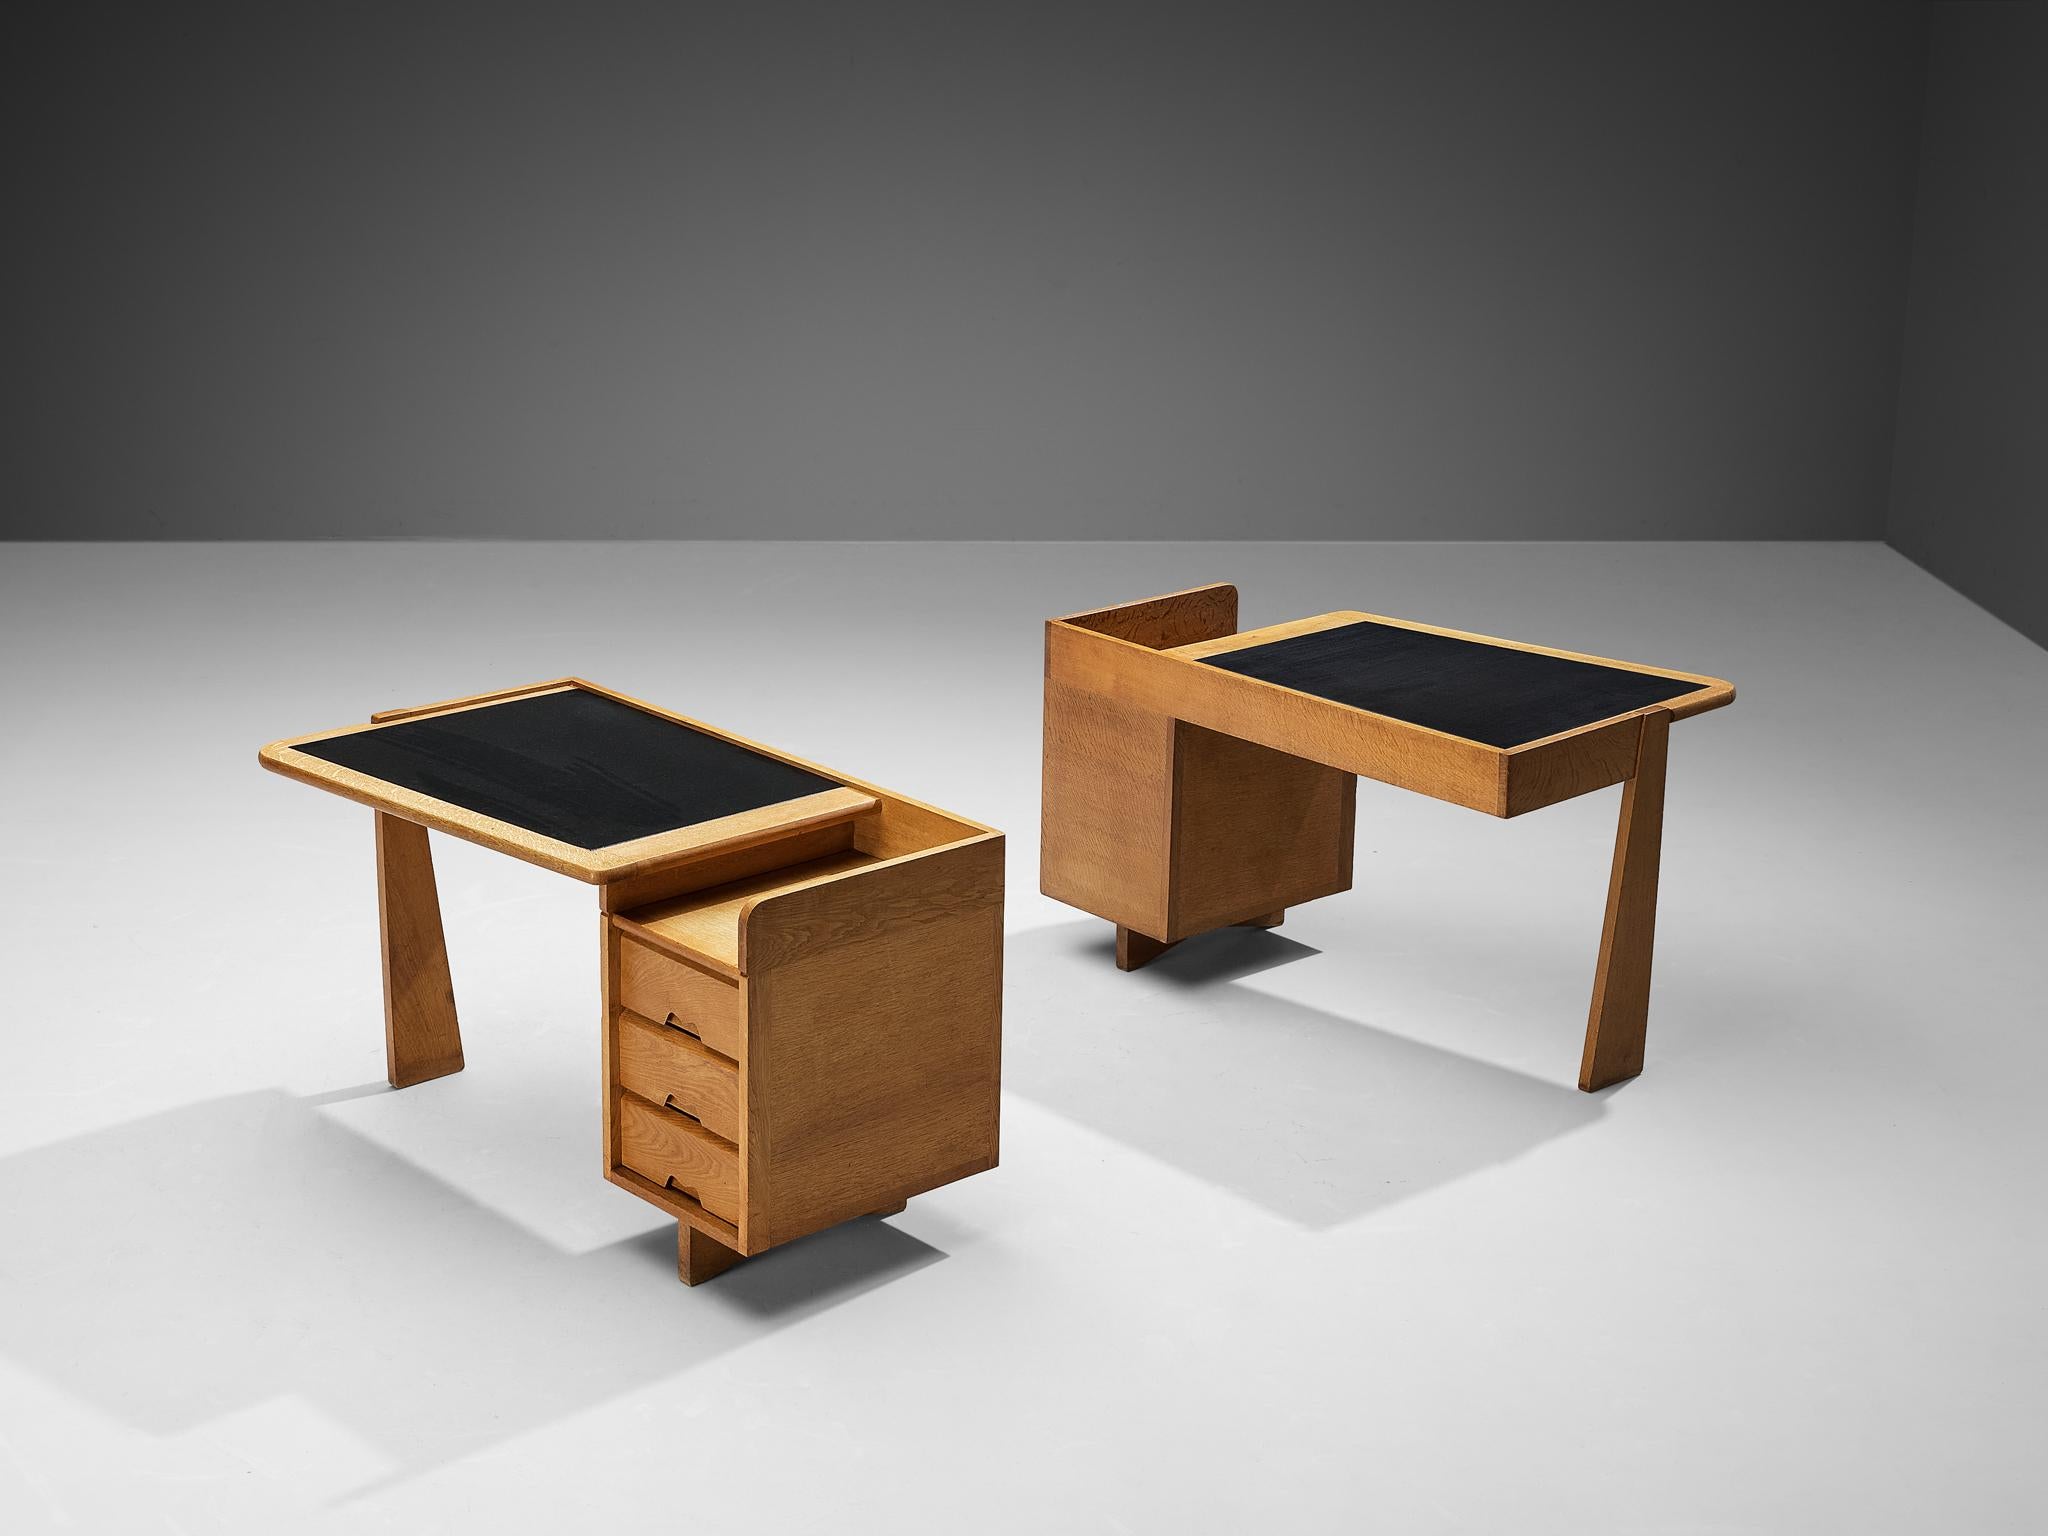 Guillerme et Chambron for Votre Maison, writing desks, oak, leather, France, 1960s.

This set of desks is designed by the renowned French duo Guillerme et Chambron. This design holds an utterly well-balanced construction supported by the